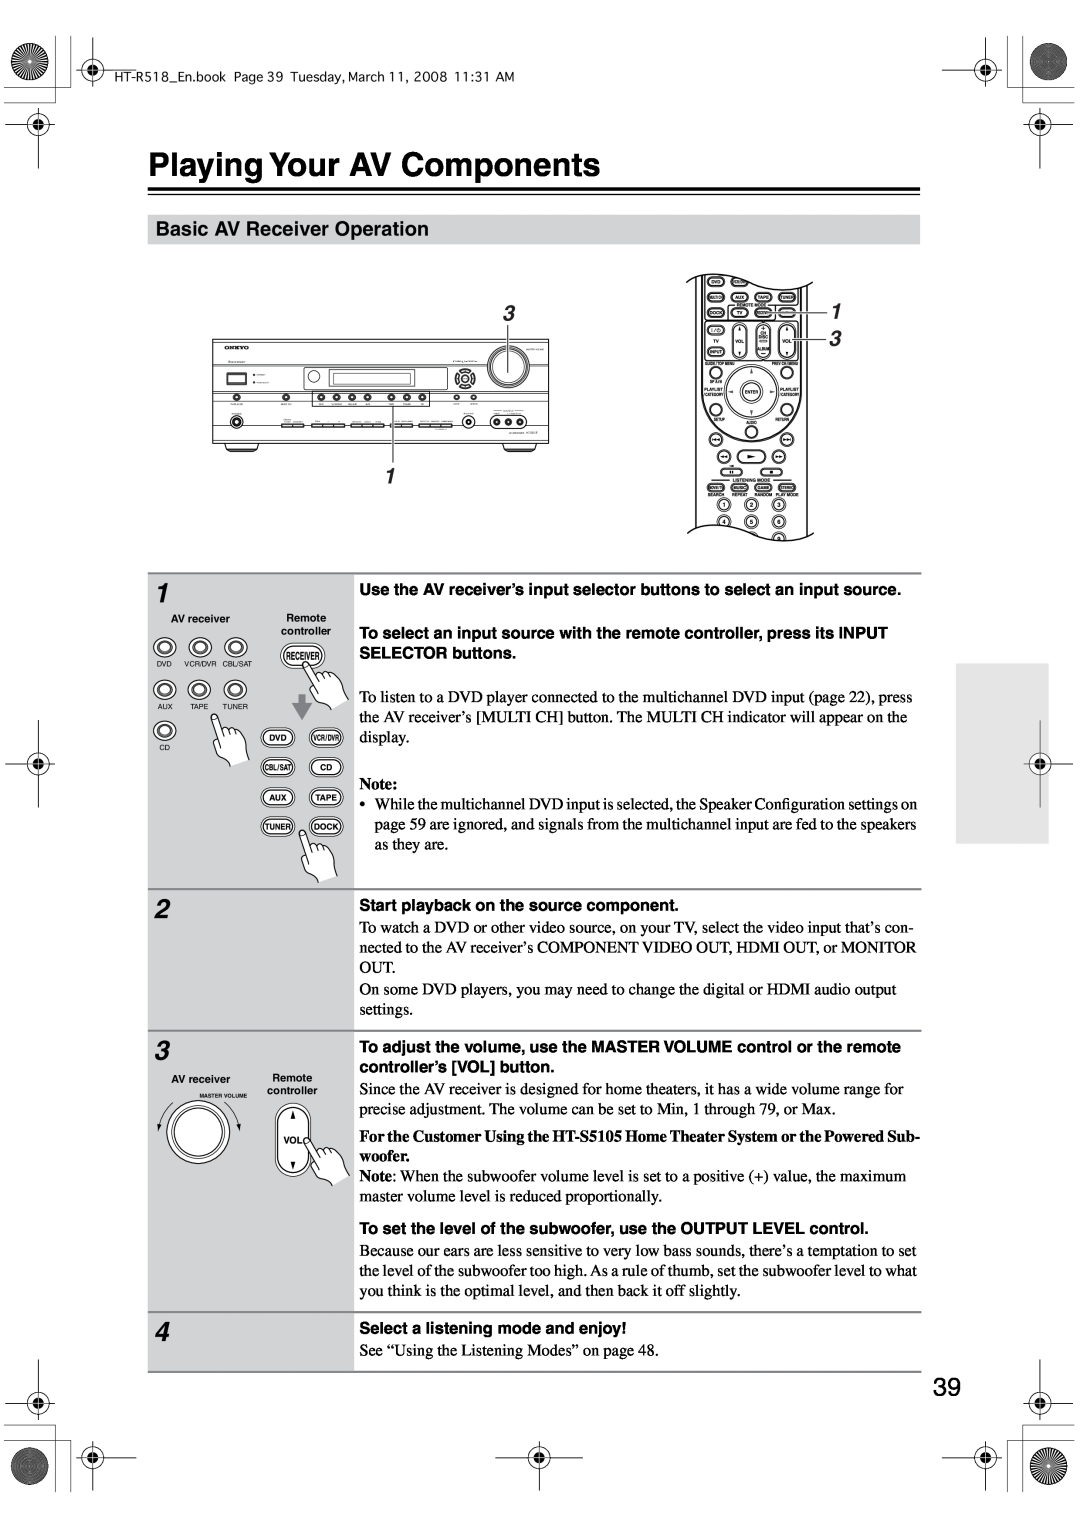 Onkyo HT-R518 Playing Your AV Components, Basic AV Receiver Operation, See “Using the Listening Modes” on page 